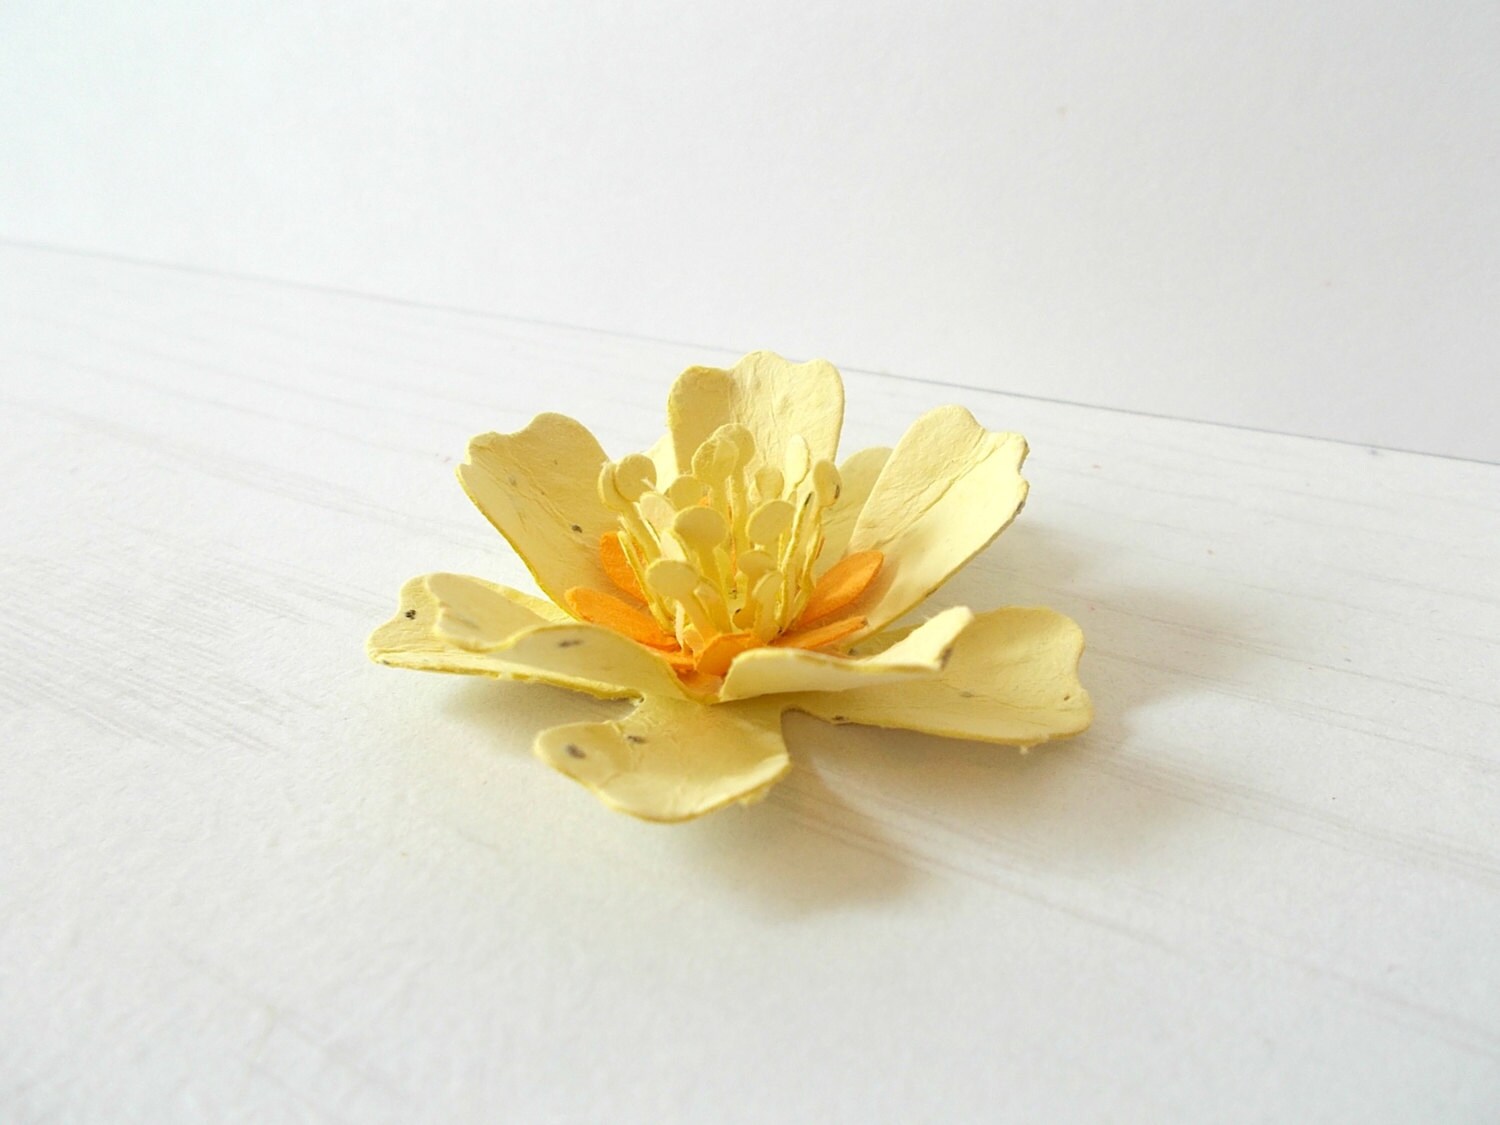 50 Yellow Buttercup Flowers - Plantable Seeded Paper Favors - Made From Paper Embedded With Flower Seeds - Plant and Grow!